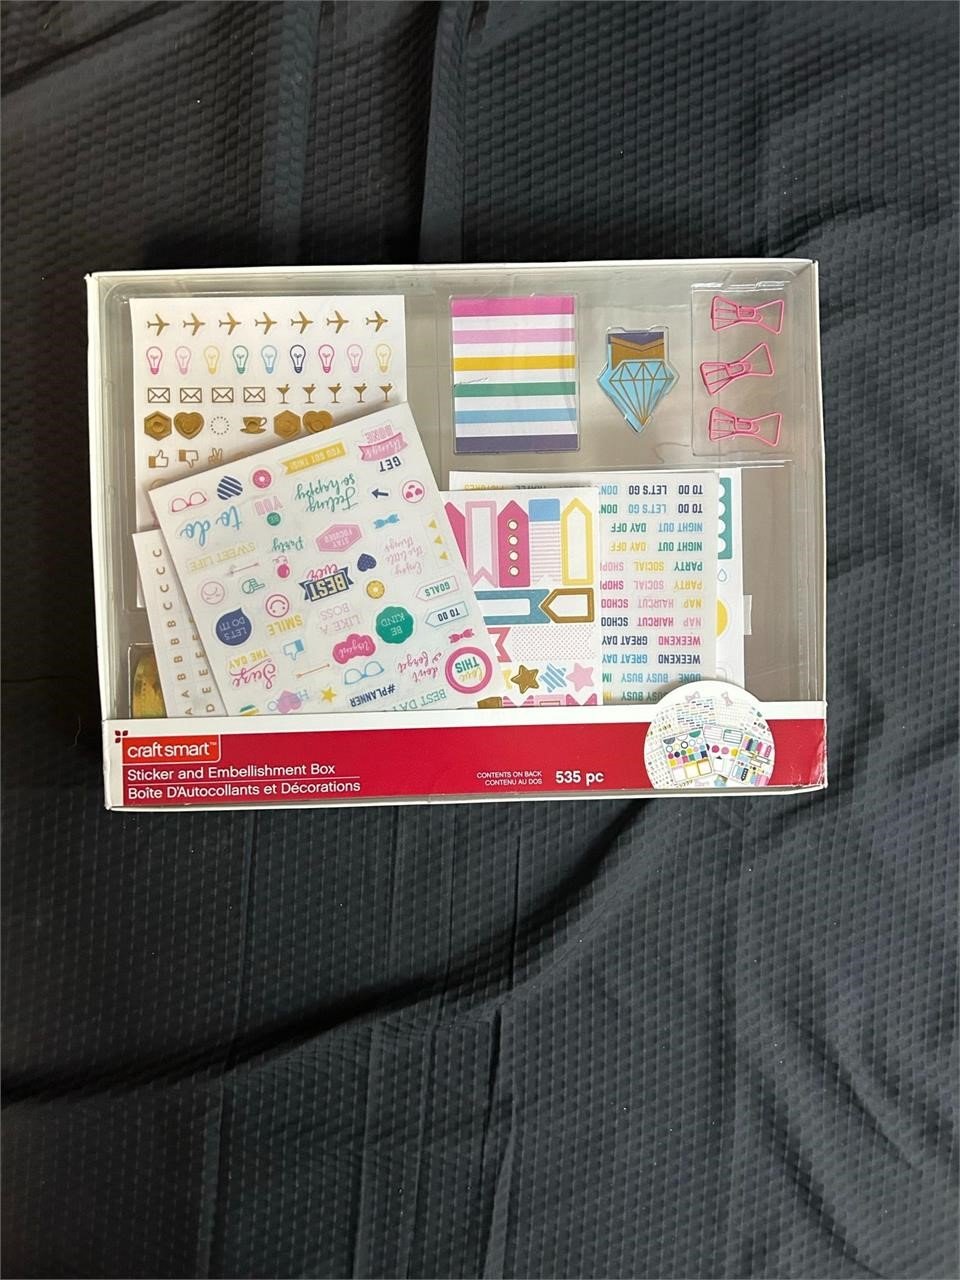 Lot of Scrapbook Stickers by Craftsmart